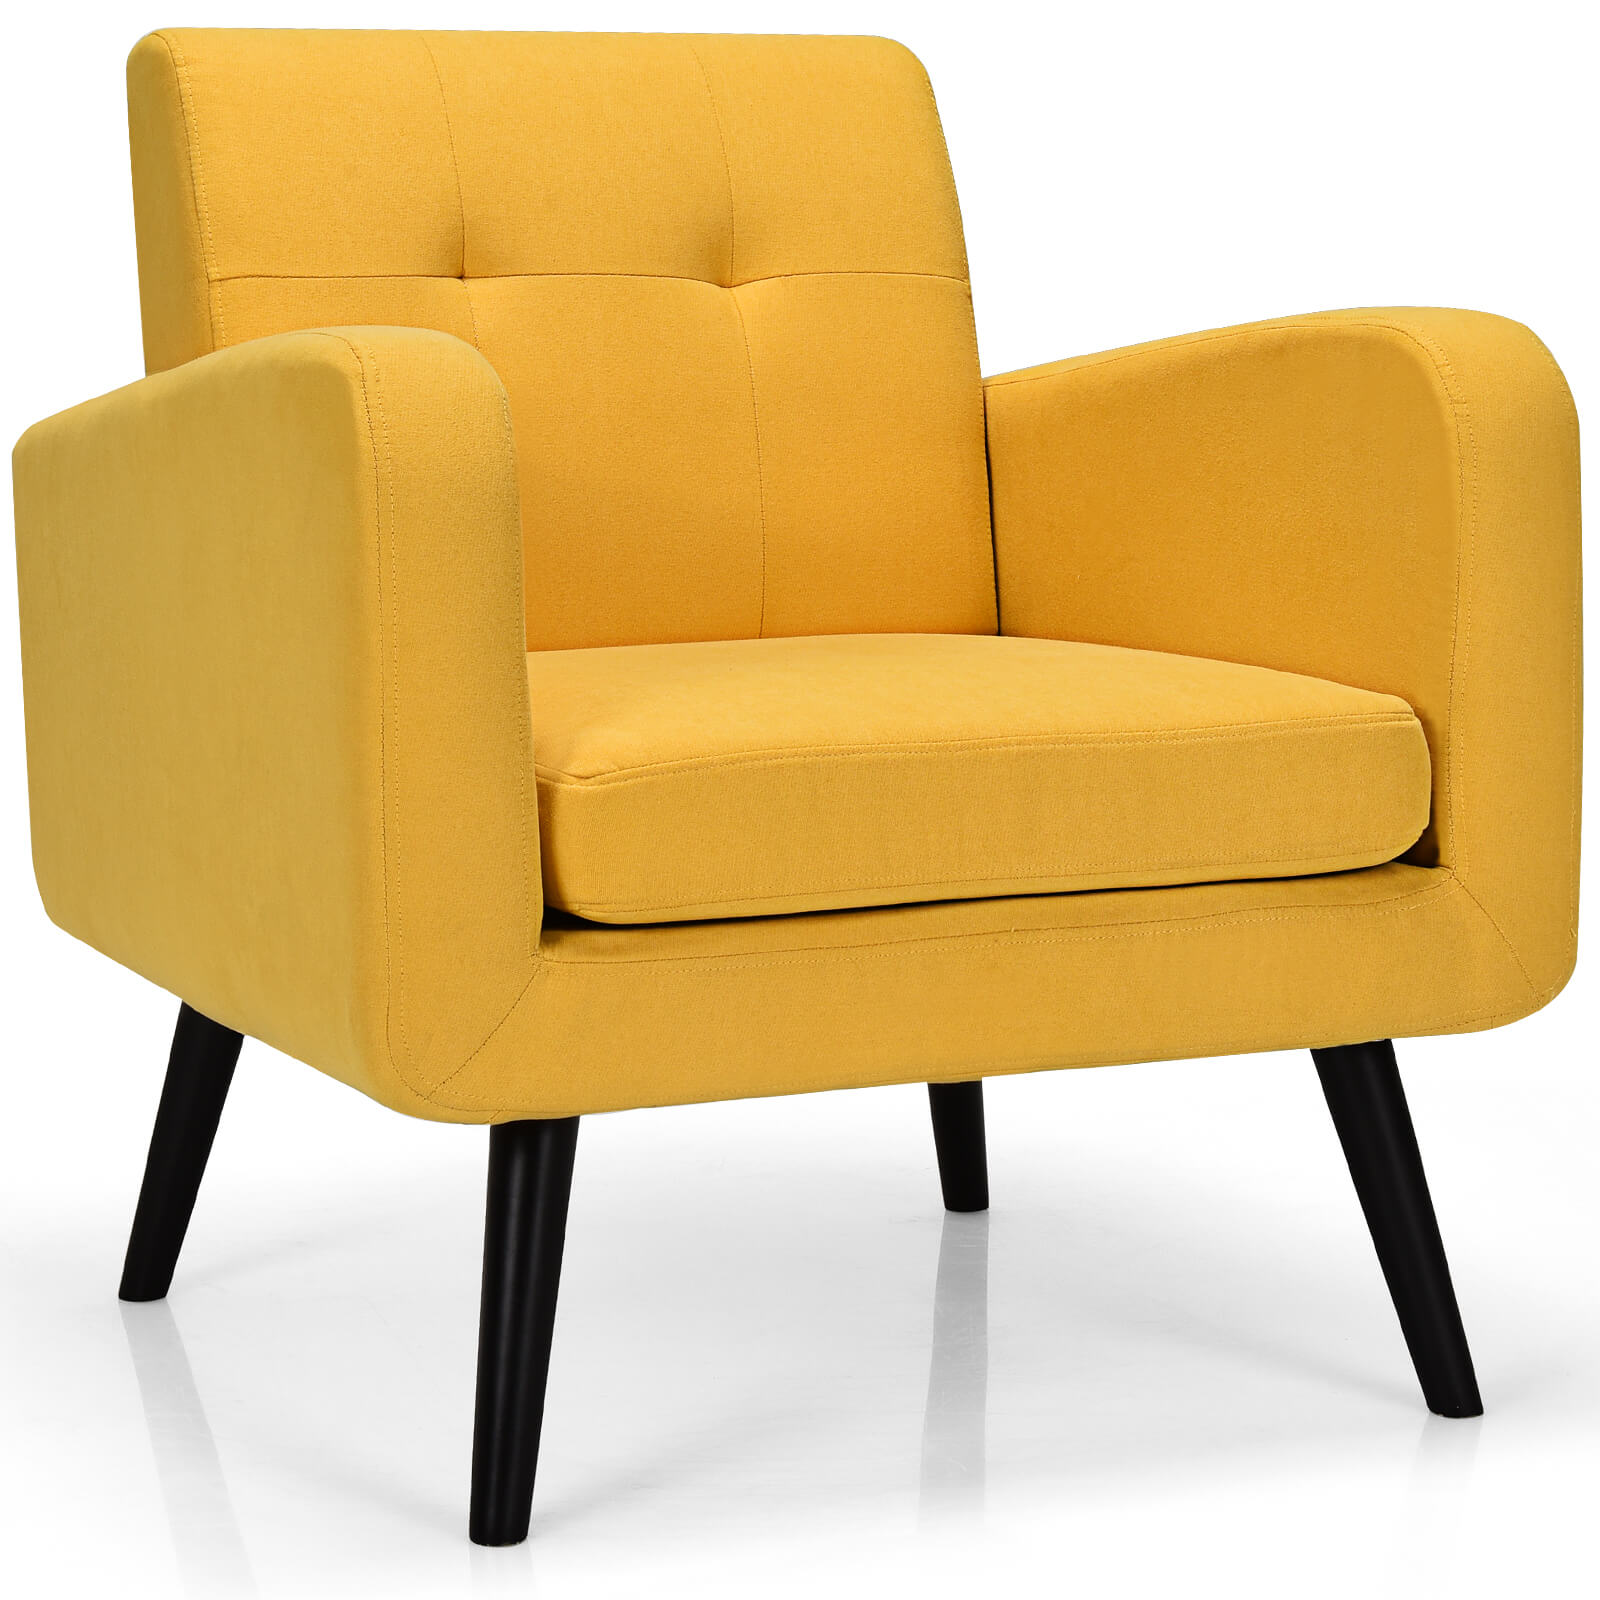 Mid-Century Modern Upholstered Accent Chair with Rubber Wood Legs-Yellow